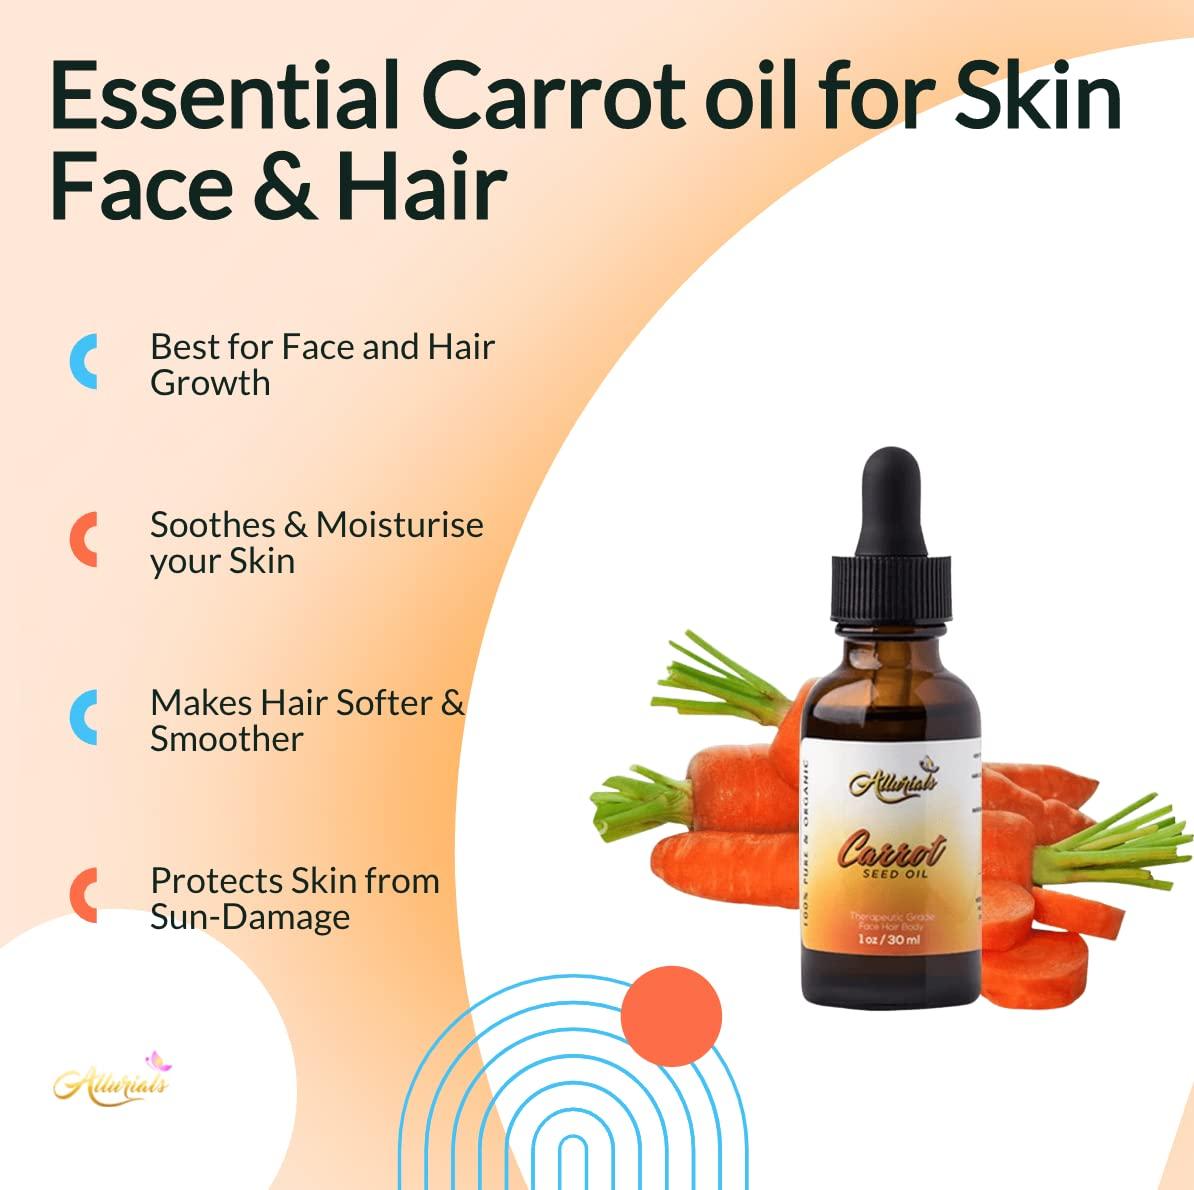 Carrot Seed Oil 100% Pure & Organic, Unrefined, Cold Pressed, All Natural,  aceite de zanahoria - Daucus Carota- Essential Carrot Moisturizer for Skin,  Face and Hair Growth - by Allurials (1 Oz)